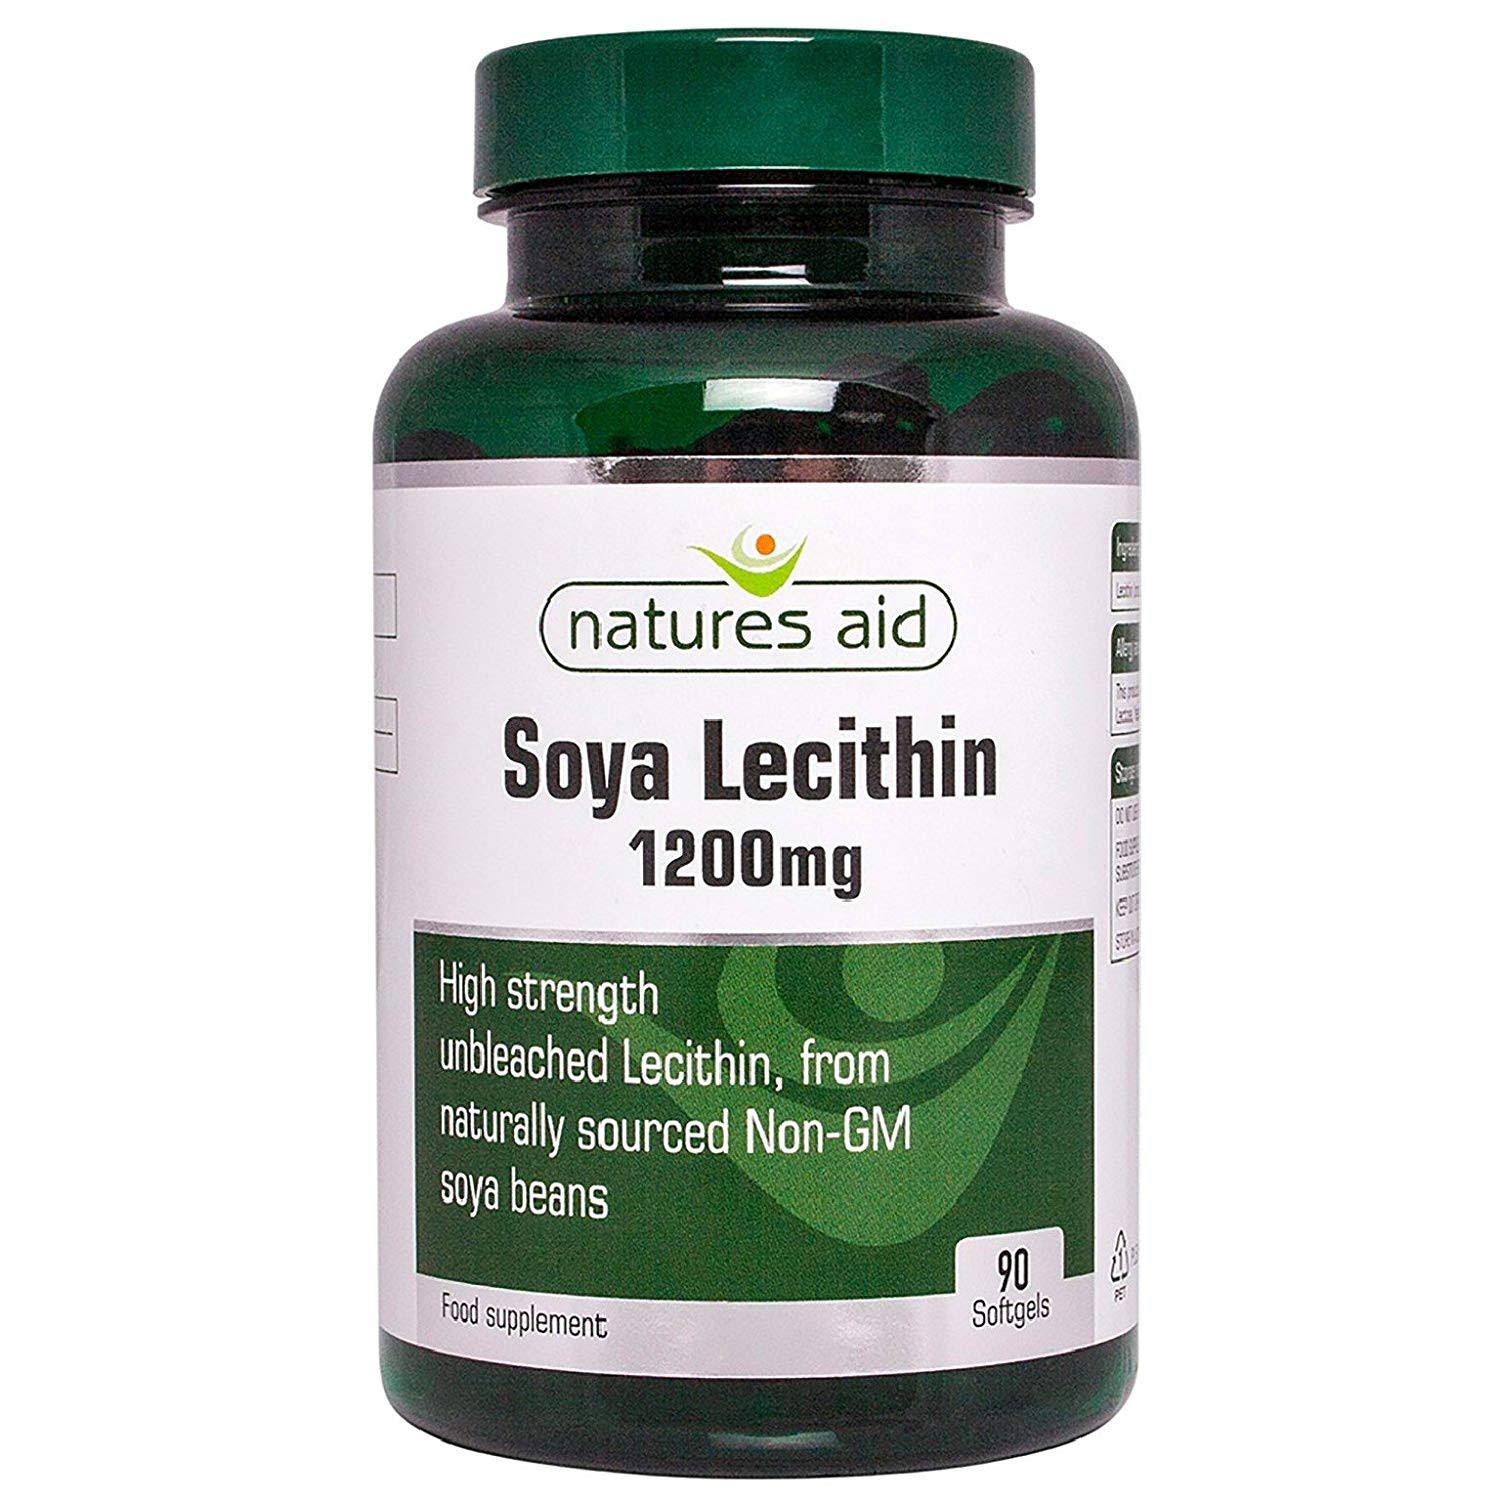 Natures Aid Lecithin Supplement - 90 Softgels